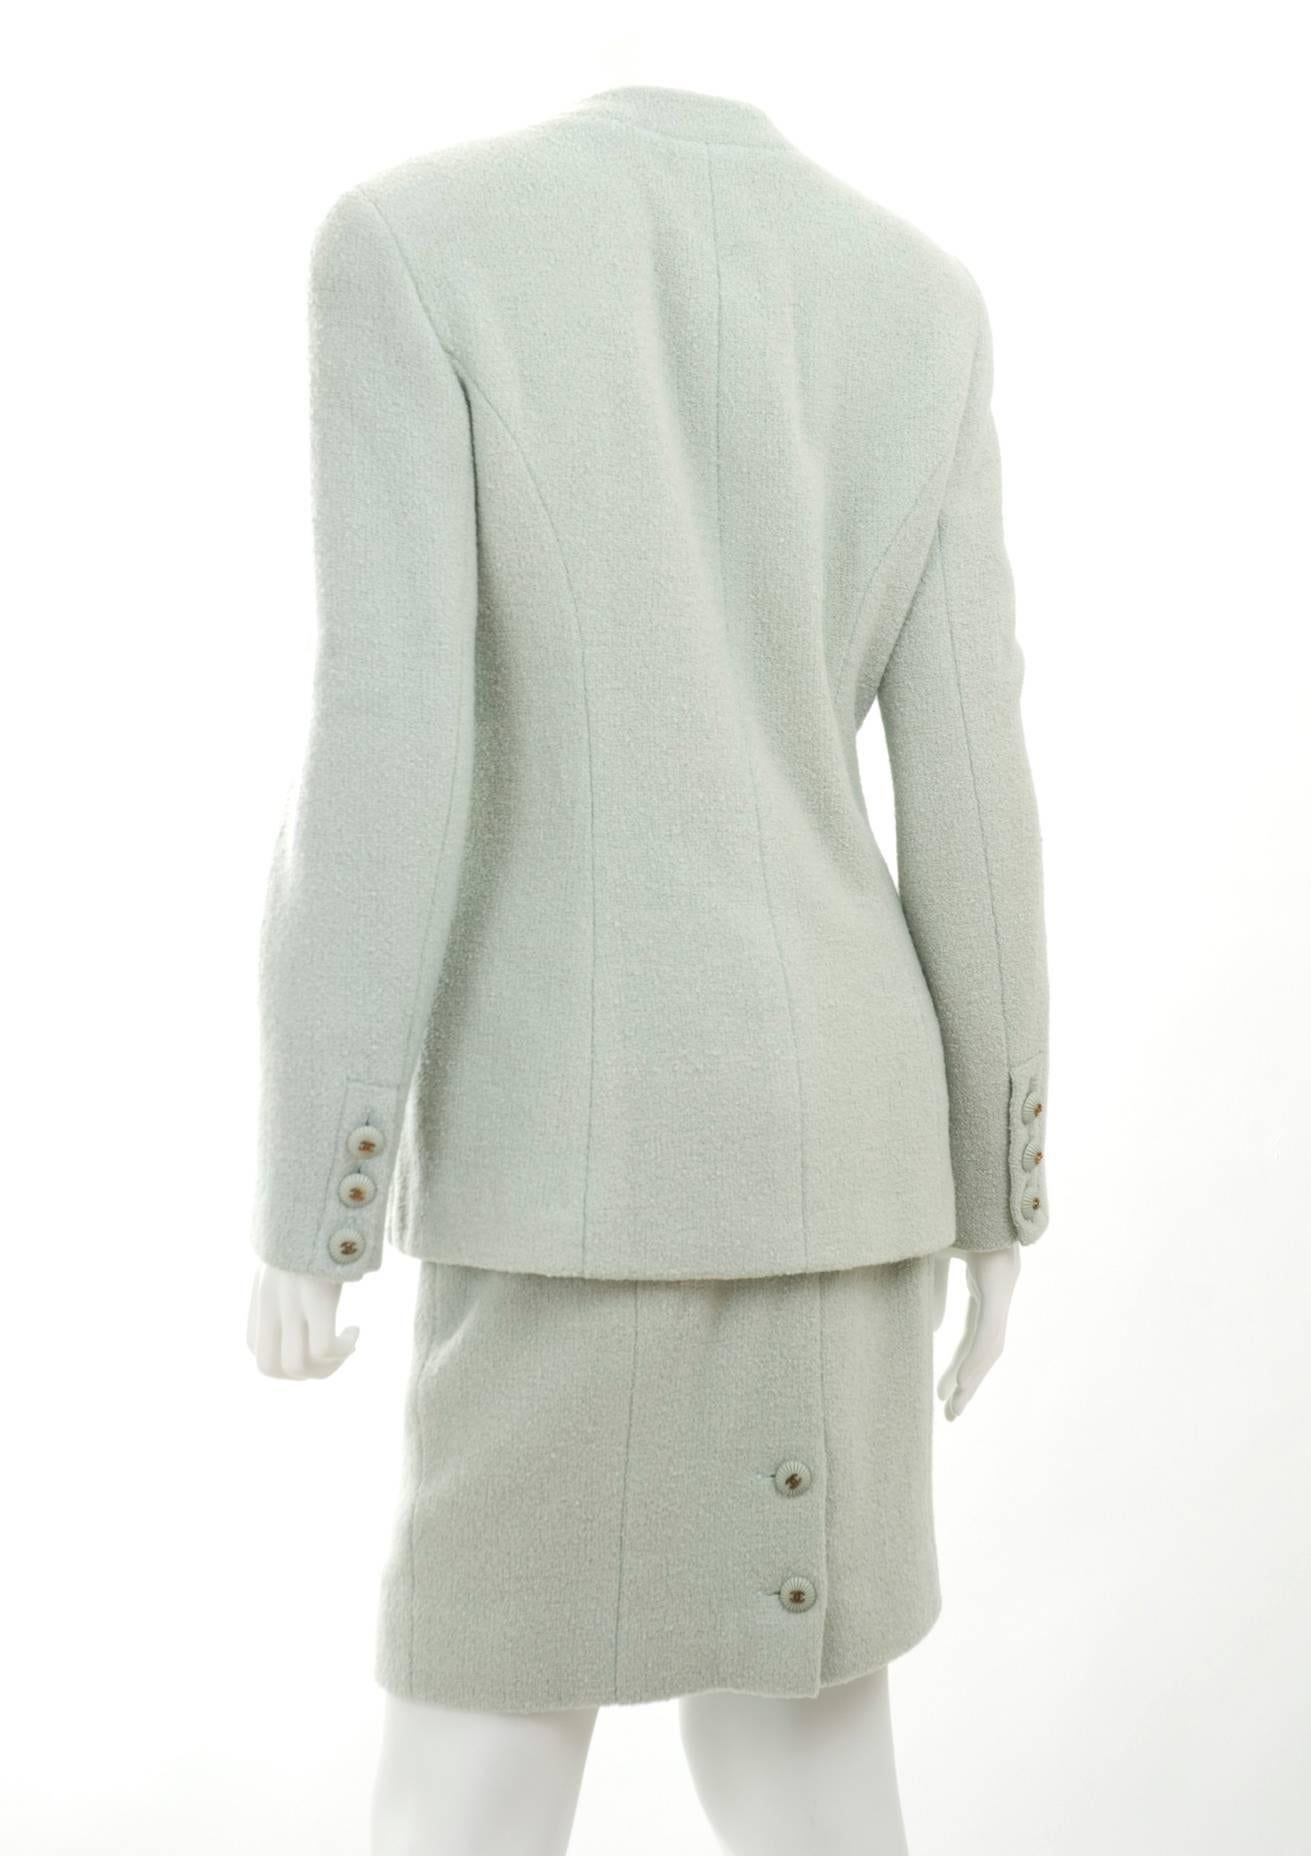 Vintage 1993 Chanel Boucle Suit in Mint Green and CC Logo Buttons In Excellent Condition For Sale In Hamburg, Deutschland